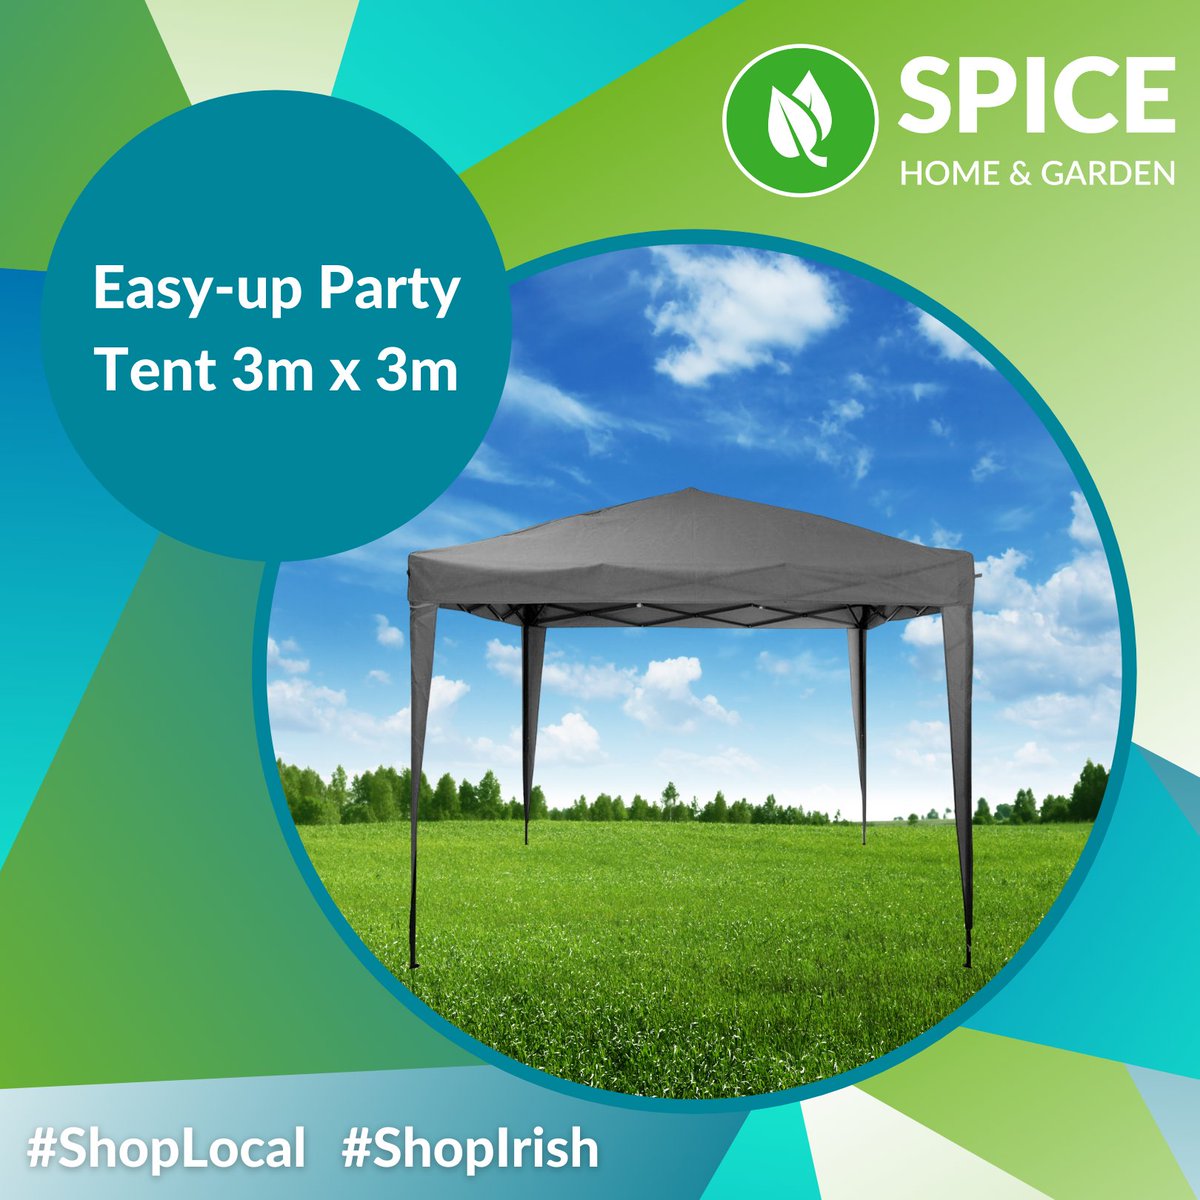 Our Easy-up Party Tent is definitely an essential for the irish weather! Quick and Easy assembly that will have you in the shade in no time! 

Buy yours here - bit.ly/2OFz2RO

#SpiceHomeGarden #Shopping #ShopLocal #ShopIrish #ShopLocal #Gazebo #PopUpGazebo